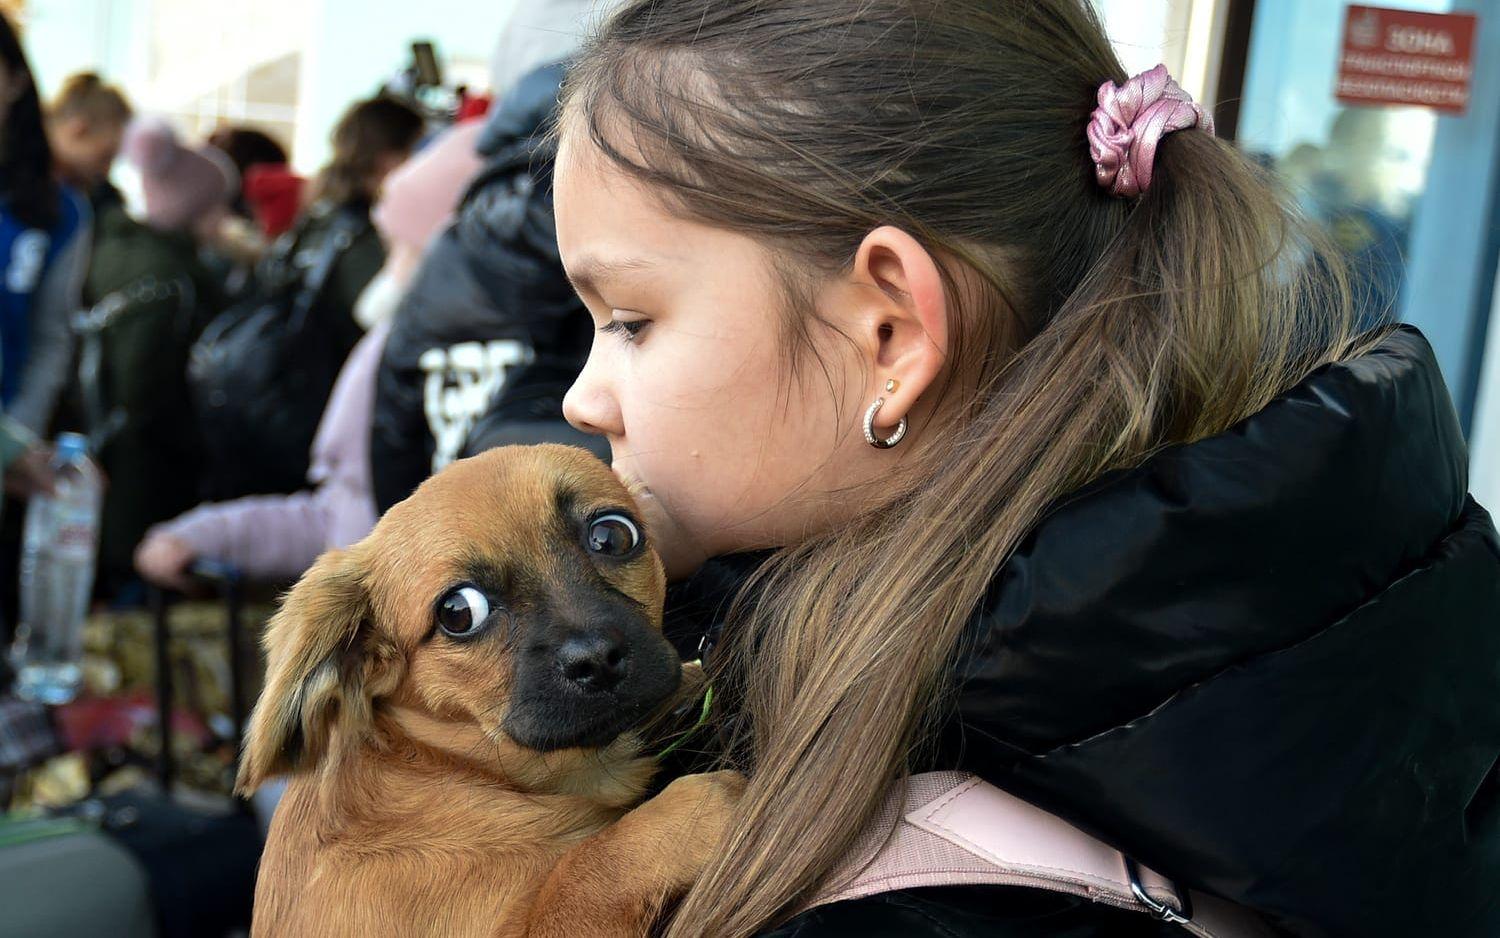 A girl, an evacuee from Kherson, holds her dog as she arrives at the railway station in Dzhankoi, Crimea, on Wednesday, Nov. 2, 2022. Russian authorities have encouraged residents of Kherson to evacuate, warning that the city may come under massive Ukrainian shelling. (AP Photo)  XAZ132